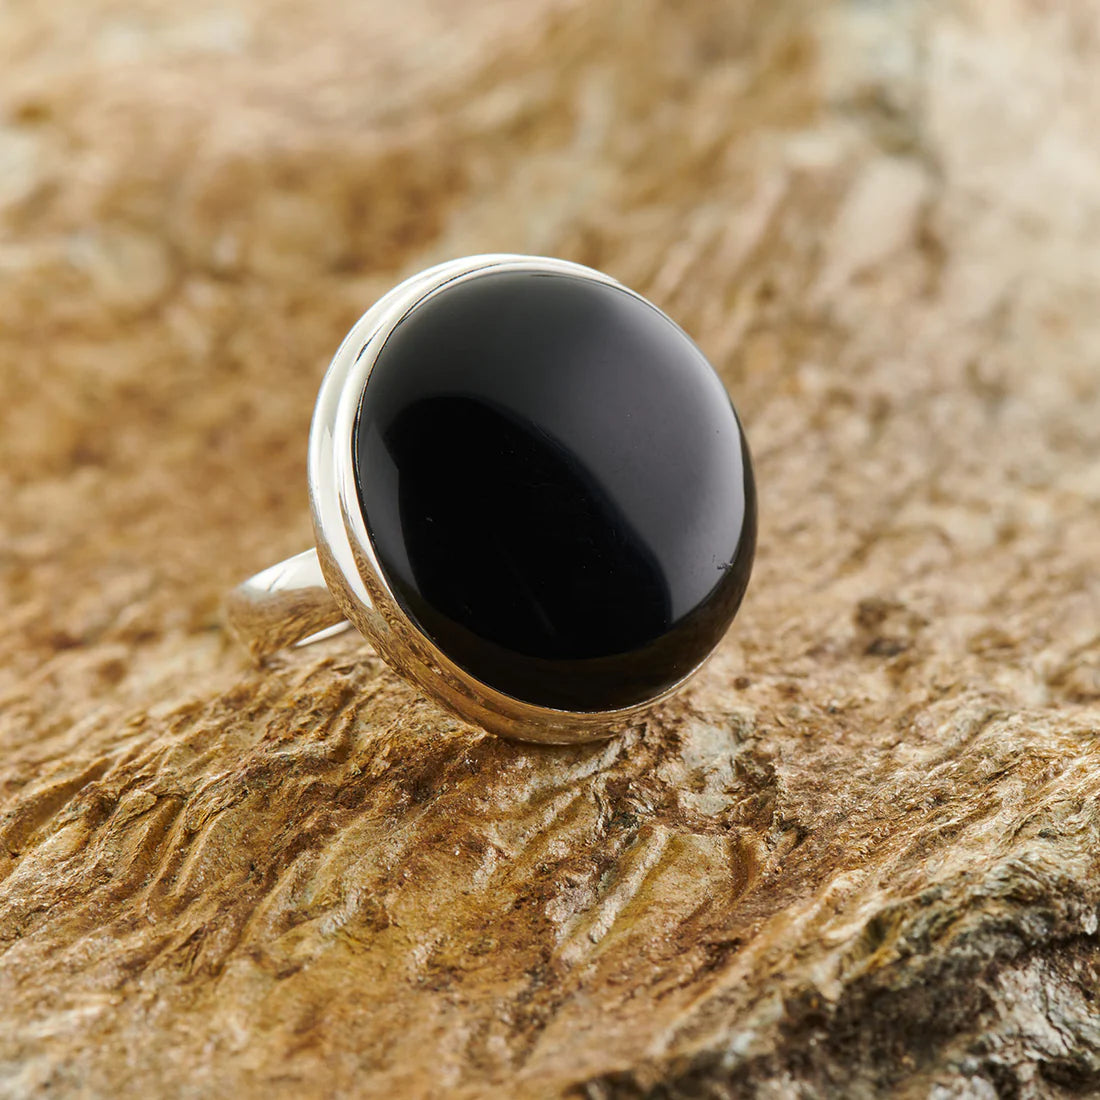 BLACK ONYX Sterling Silver Ring - Assorted Sizes